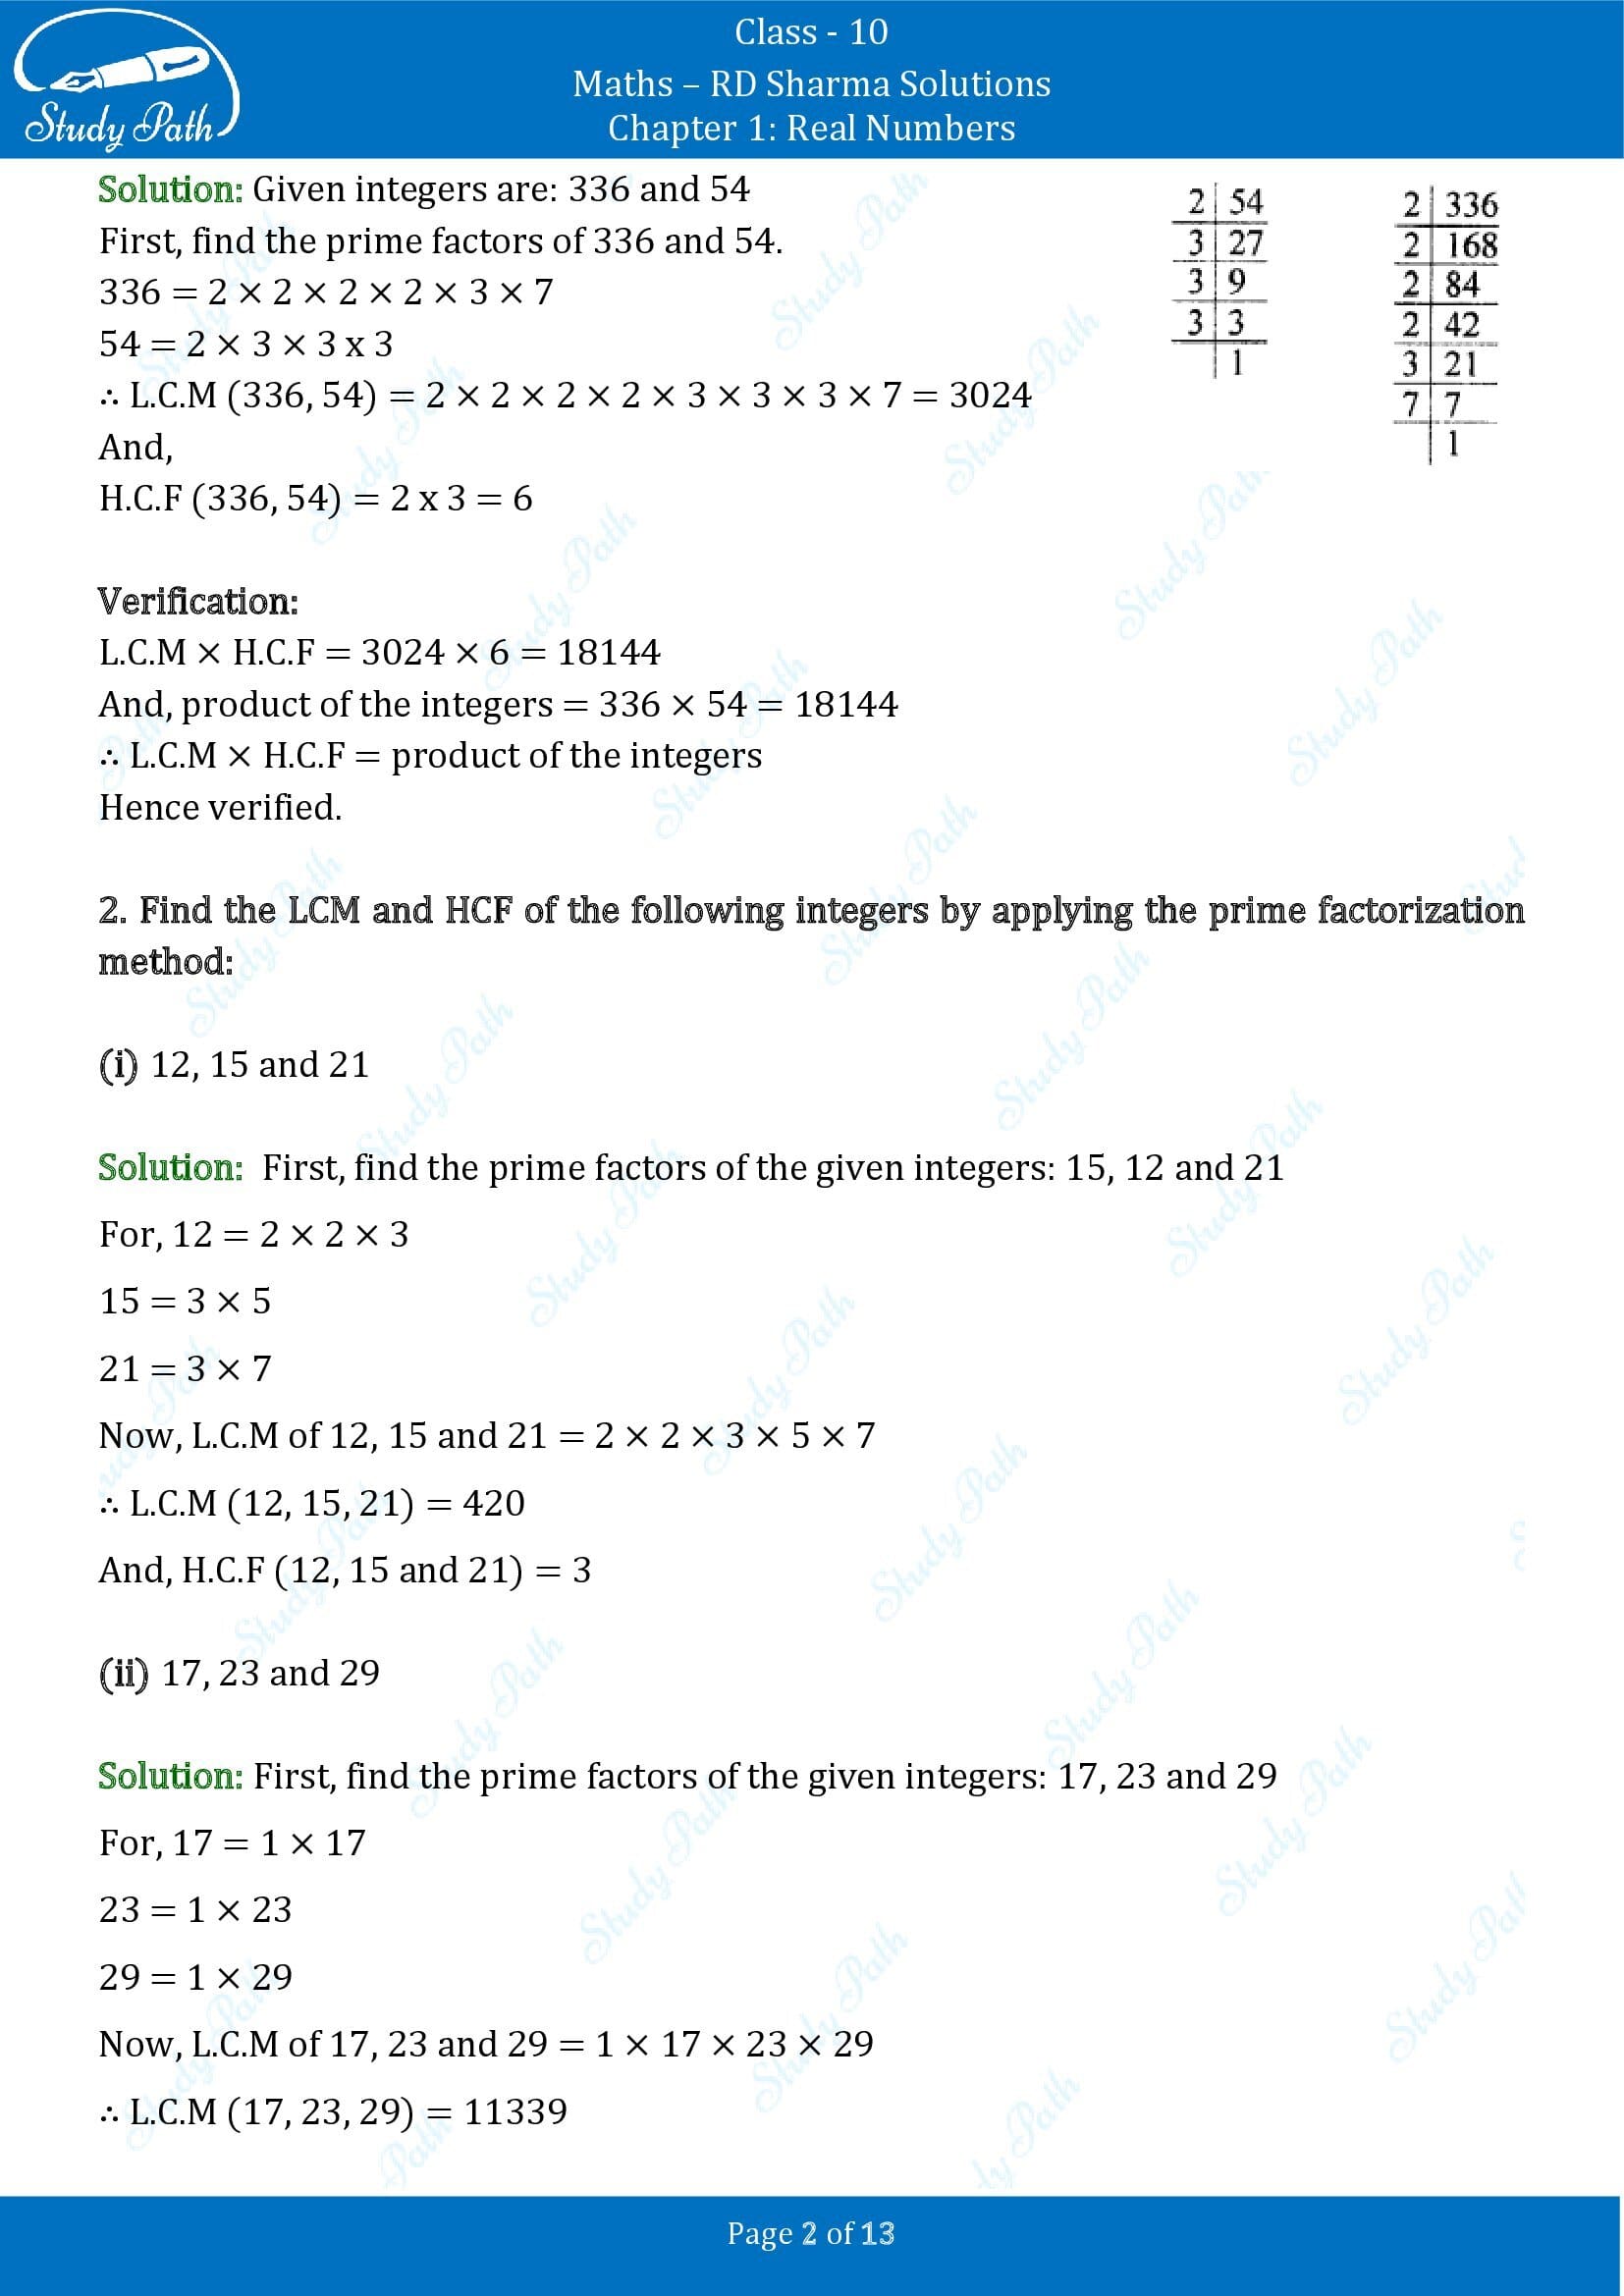 RD Sharma Solutions Class 10 Chapter 1 Real Numbers Exercise 1.4 00002